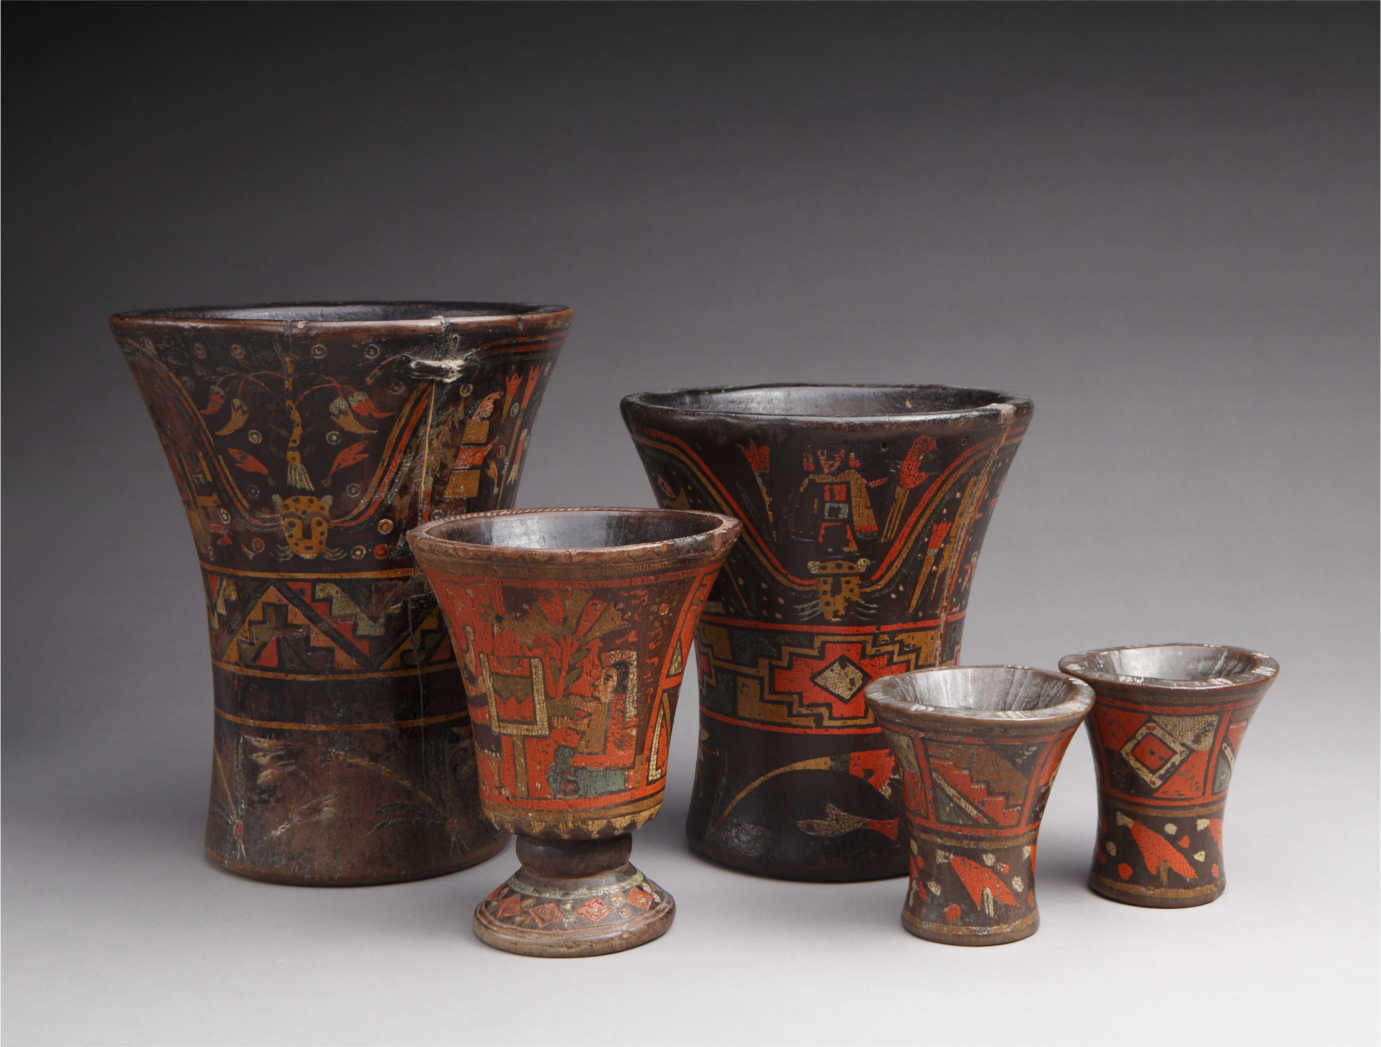 From *The Red That Colored the World*. Collection of wooden of Keros, Peru, 17th circa 18th century. Wood, paint, 8 3/8 x 6 7/8 in., 5 ½ x 4 ½ in., 3 3/8 x 3 ¼ in. Private collection. Photograph by Addison Doty. Image courtesy of the Museum of International Folk Art.